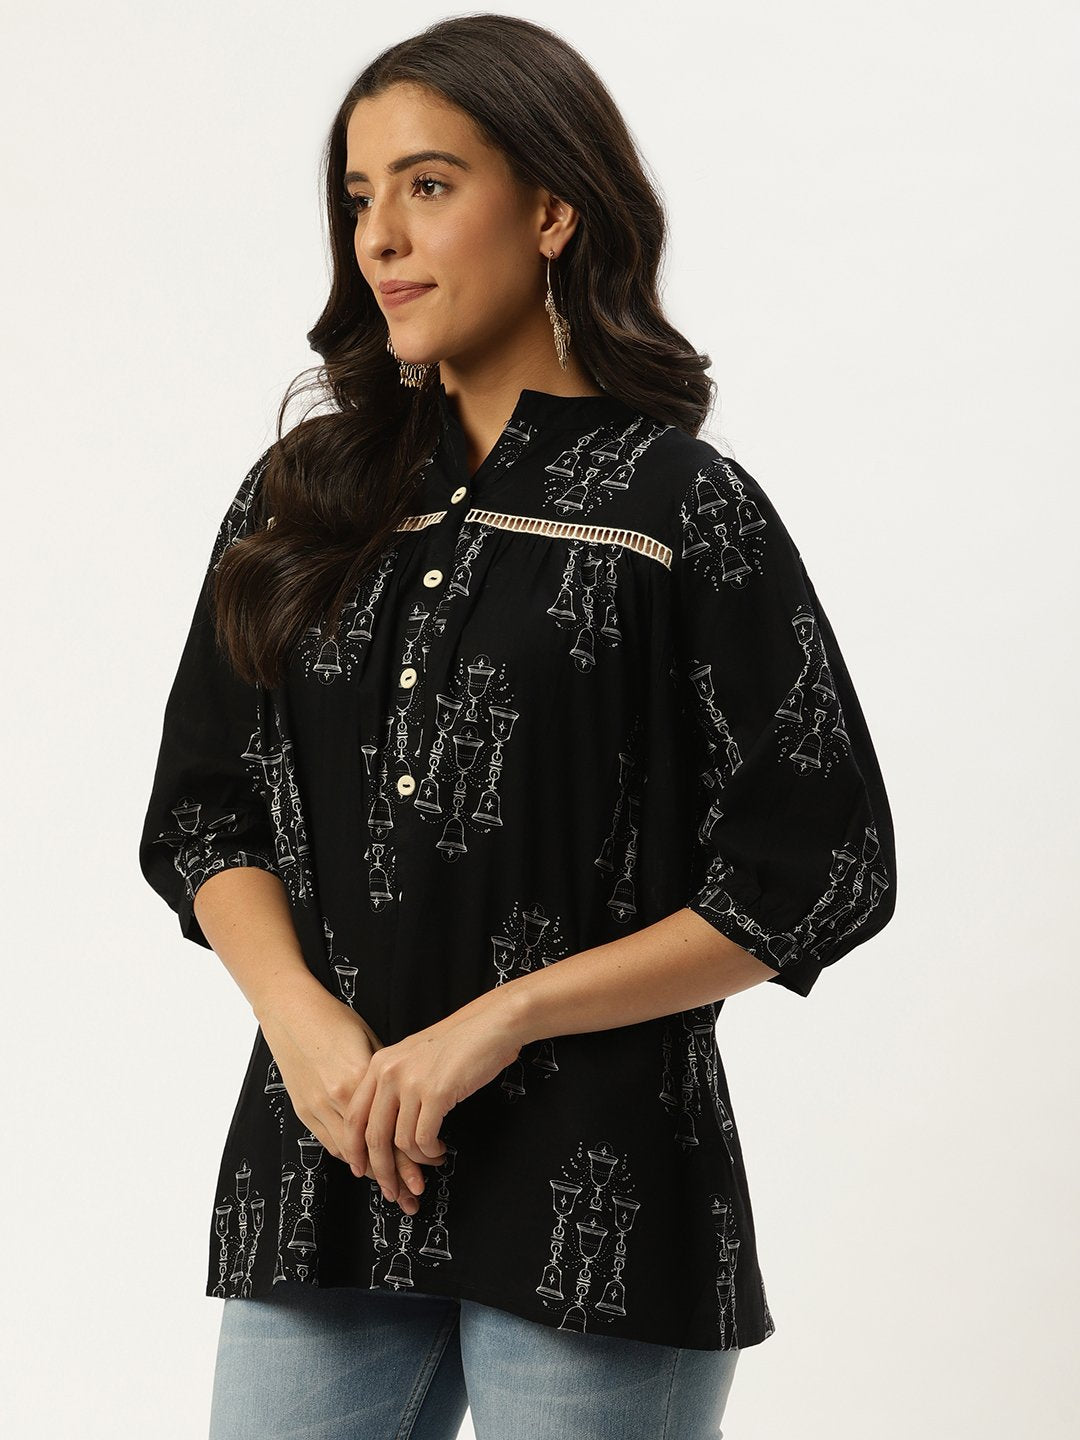 Women's Black Three-Quarter Sleeves Gathered Or Pleated Top - Nayo Clothing